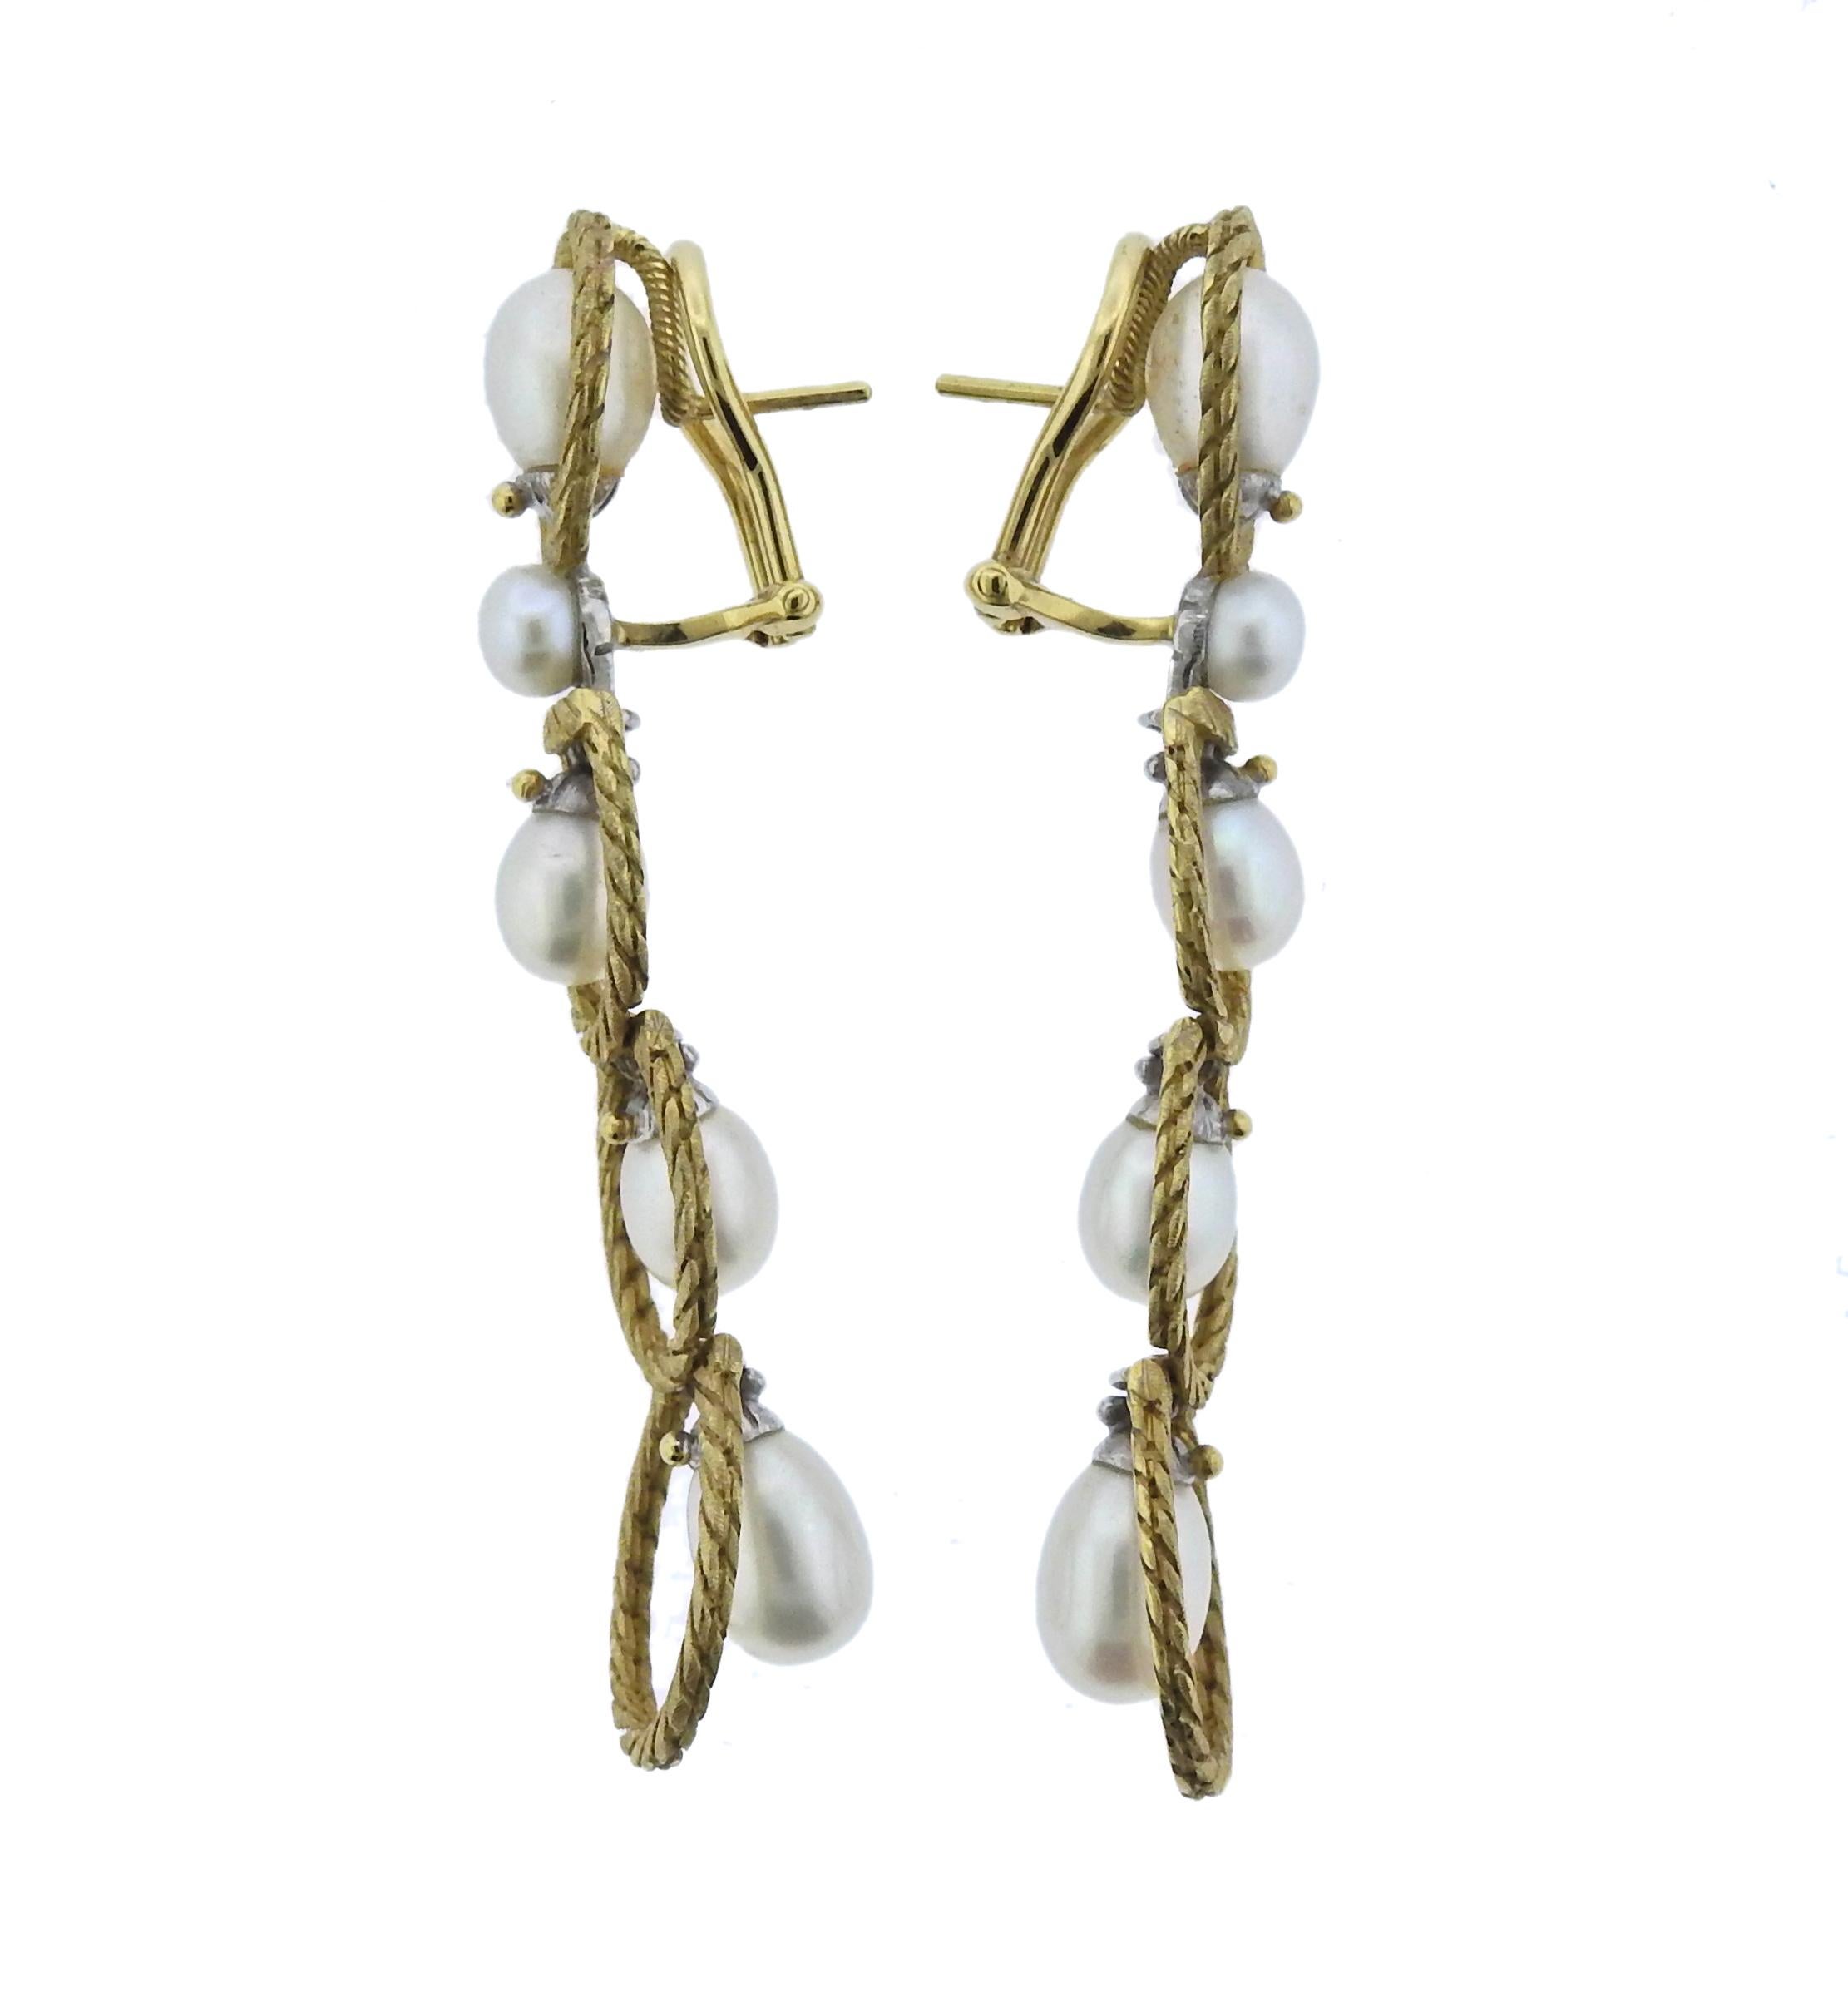 Pair of long drop earrings by Buccellati, set with pearls.  Earrings are 59mm x 14mm, weigh 16.8 grams. Marked: 750 18k Buccellati .